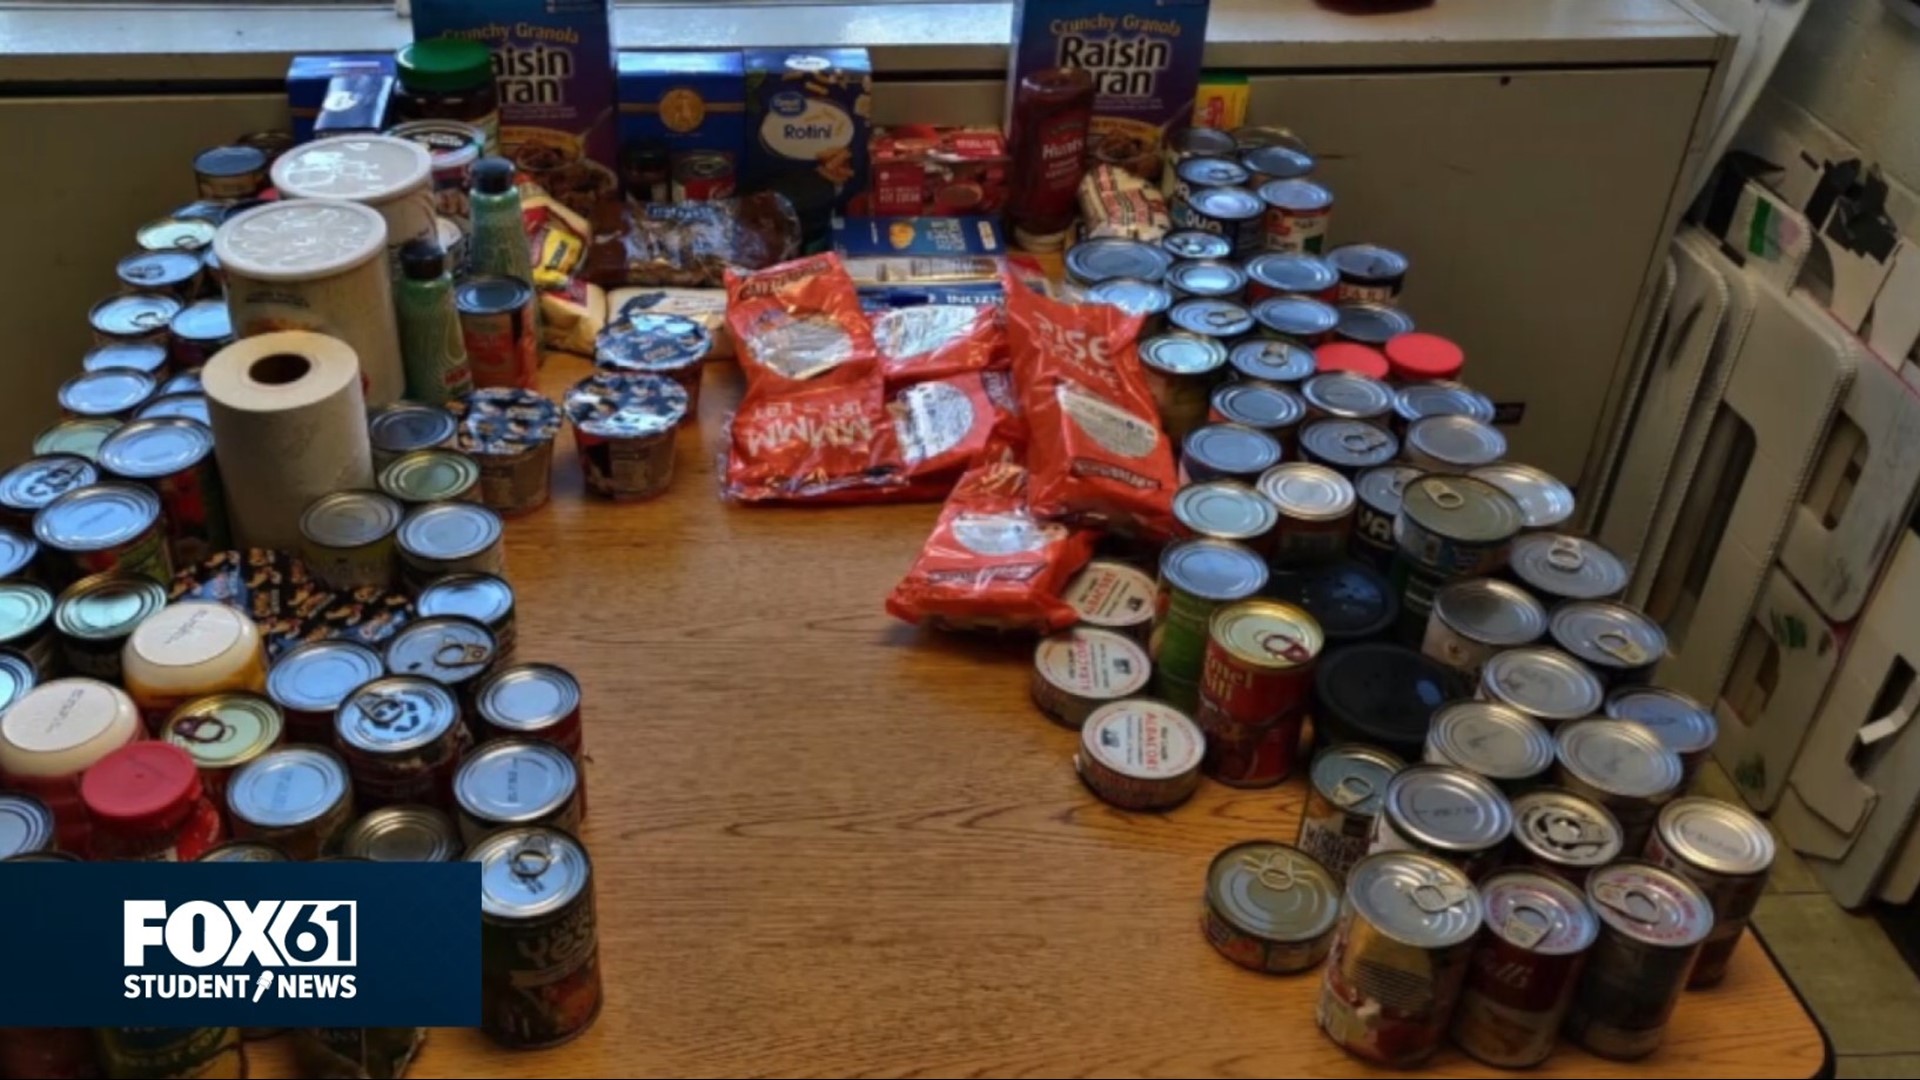 Students at ACES Wintergreen Inter District Magnet School in North Haven teamed up to collect food items for those in need for the Connecticut Food Share.